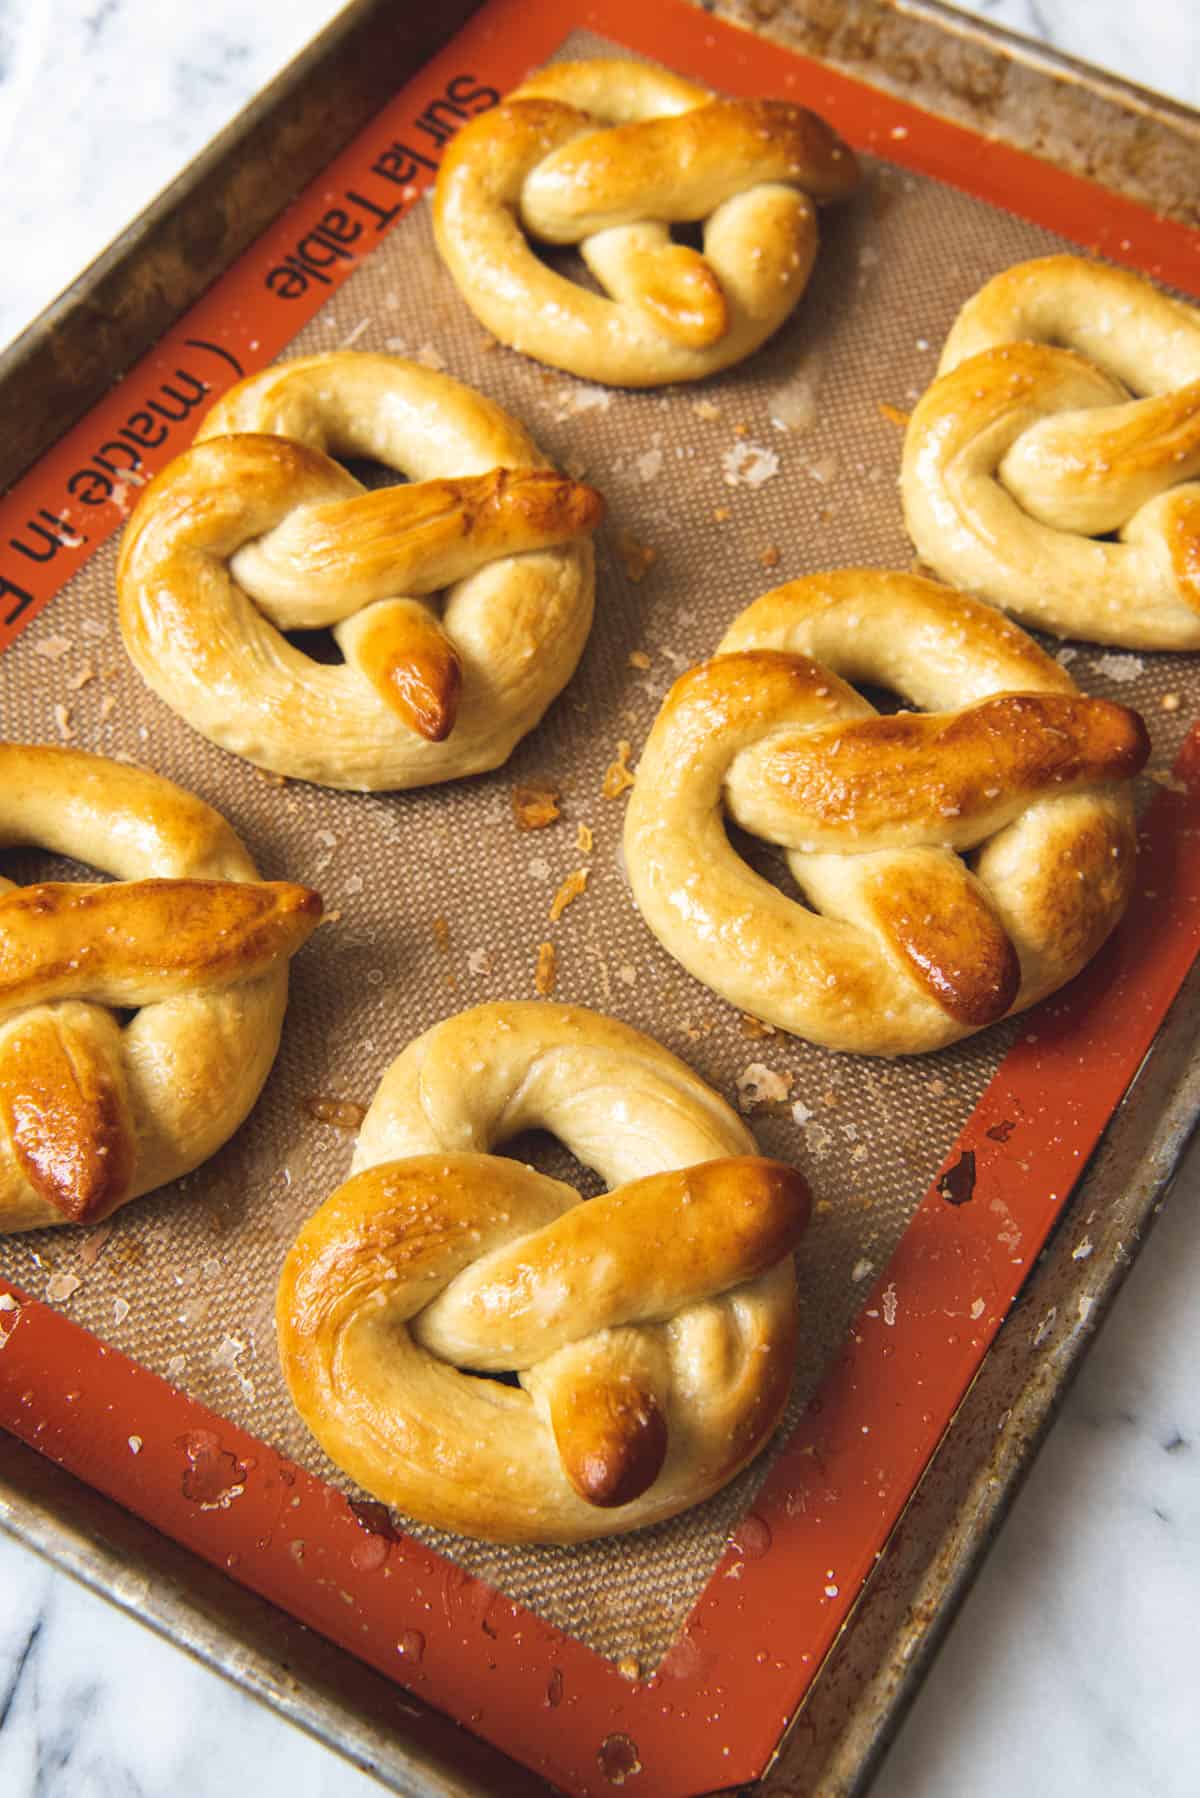 An image of golden brown homemade soft pretzels on a baking sheet with a silicon mat.